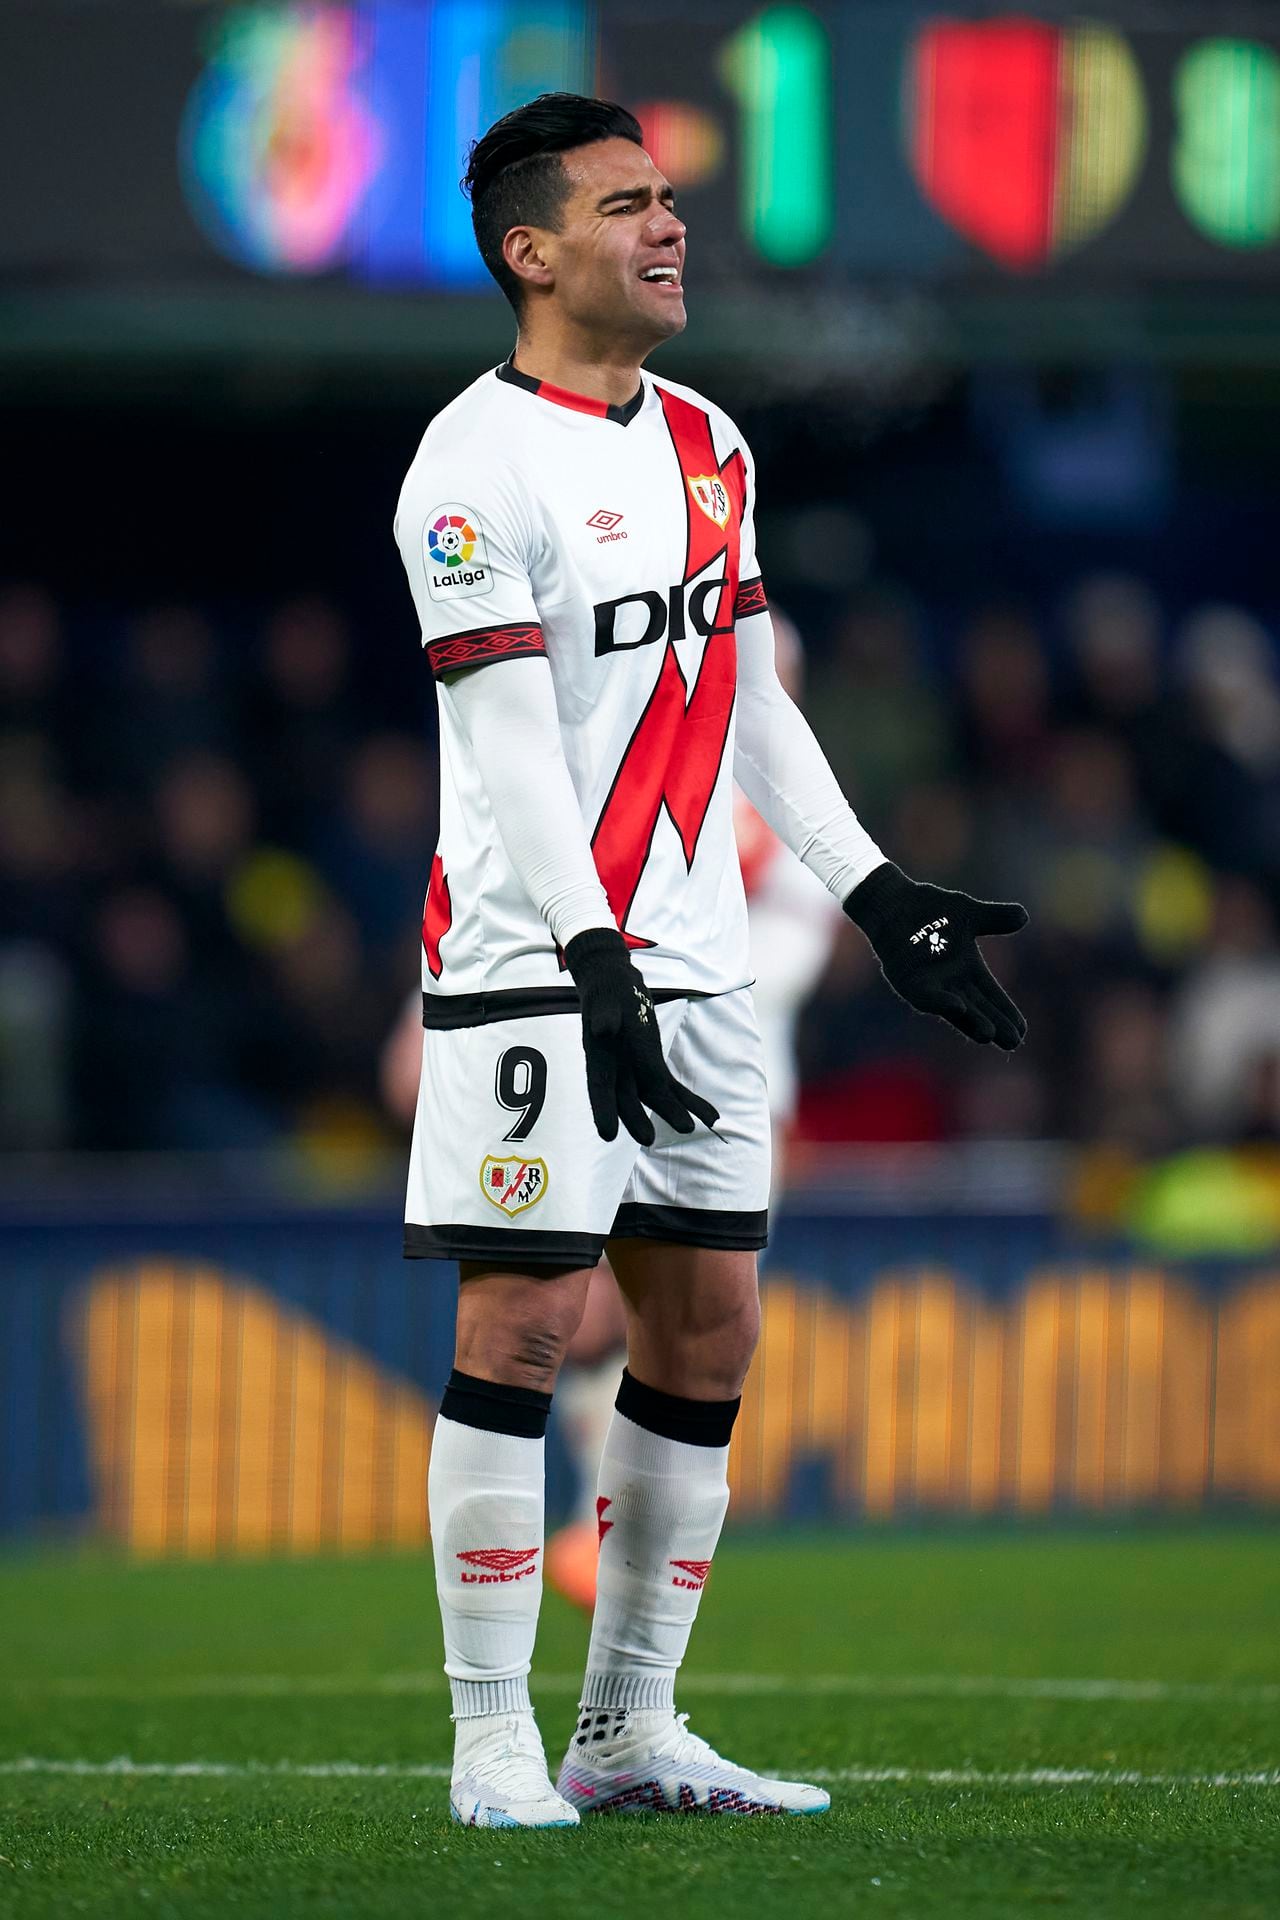 VILLARREAL, SPAIN - JANUARY 30: Radamel Falcao of Rayo Vallecano reacts during the LaLiga Santander match between Villarreal CF and Rayo Vallecano at Estadio de la Ceramica on January 30, 2023 in Villarreal, Spain. (Photo by Manuel Queimadelos/Quality Sport Images/Getty Images)